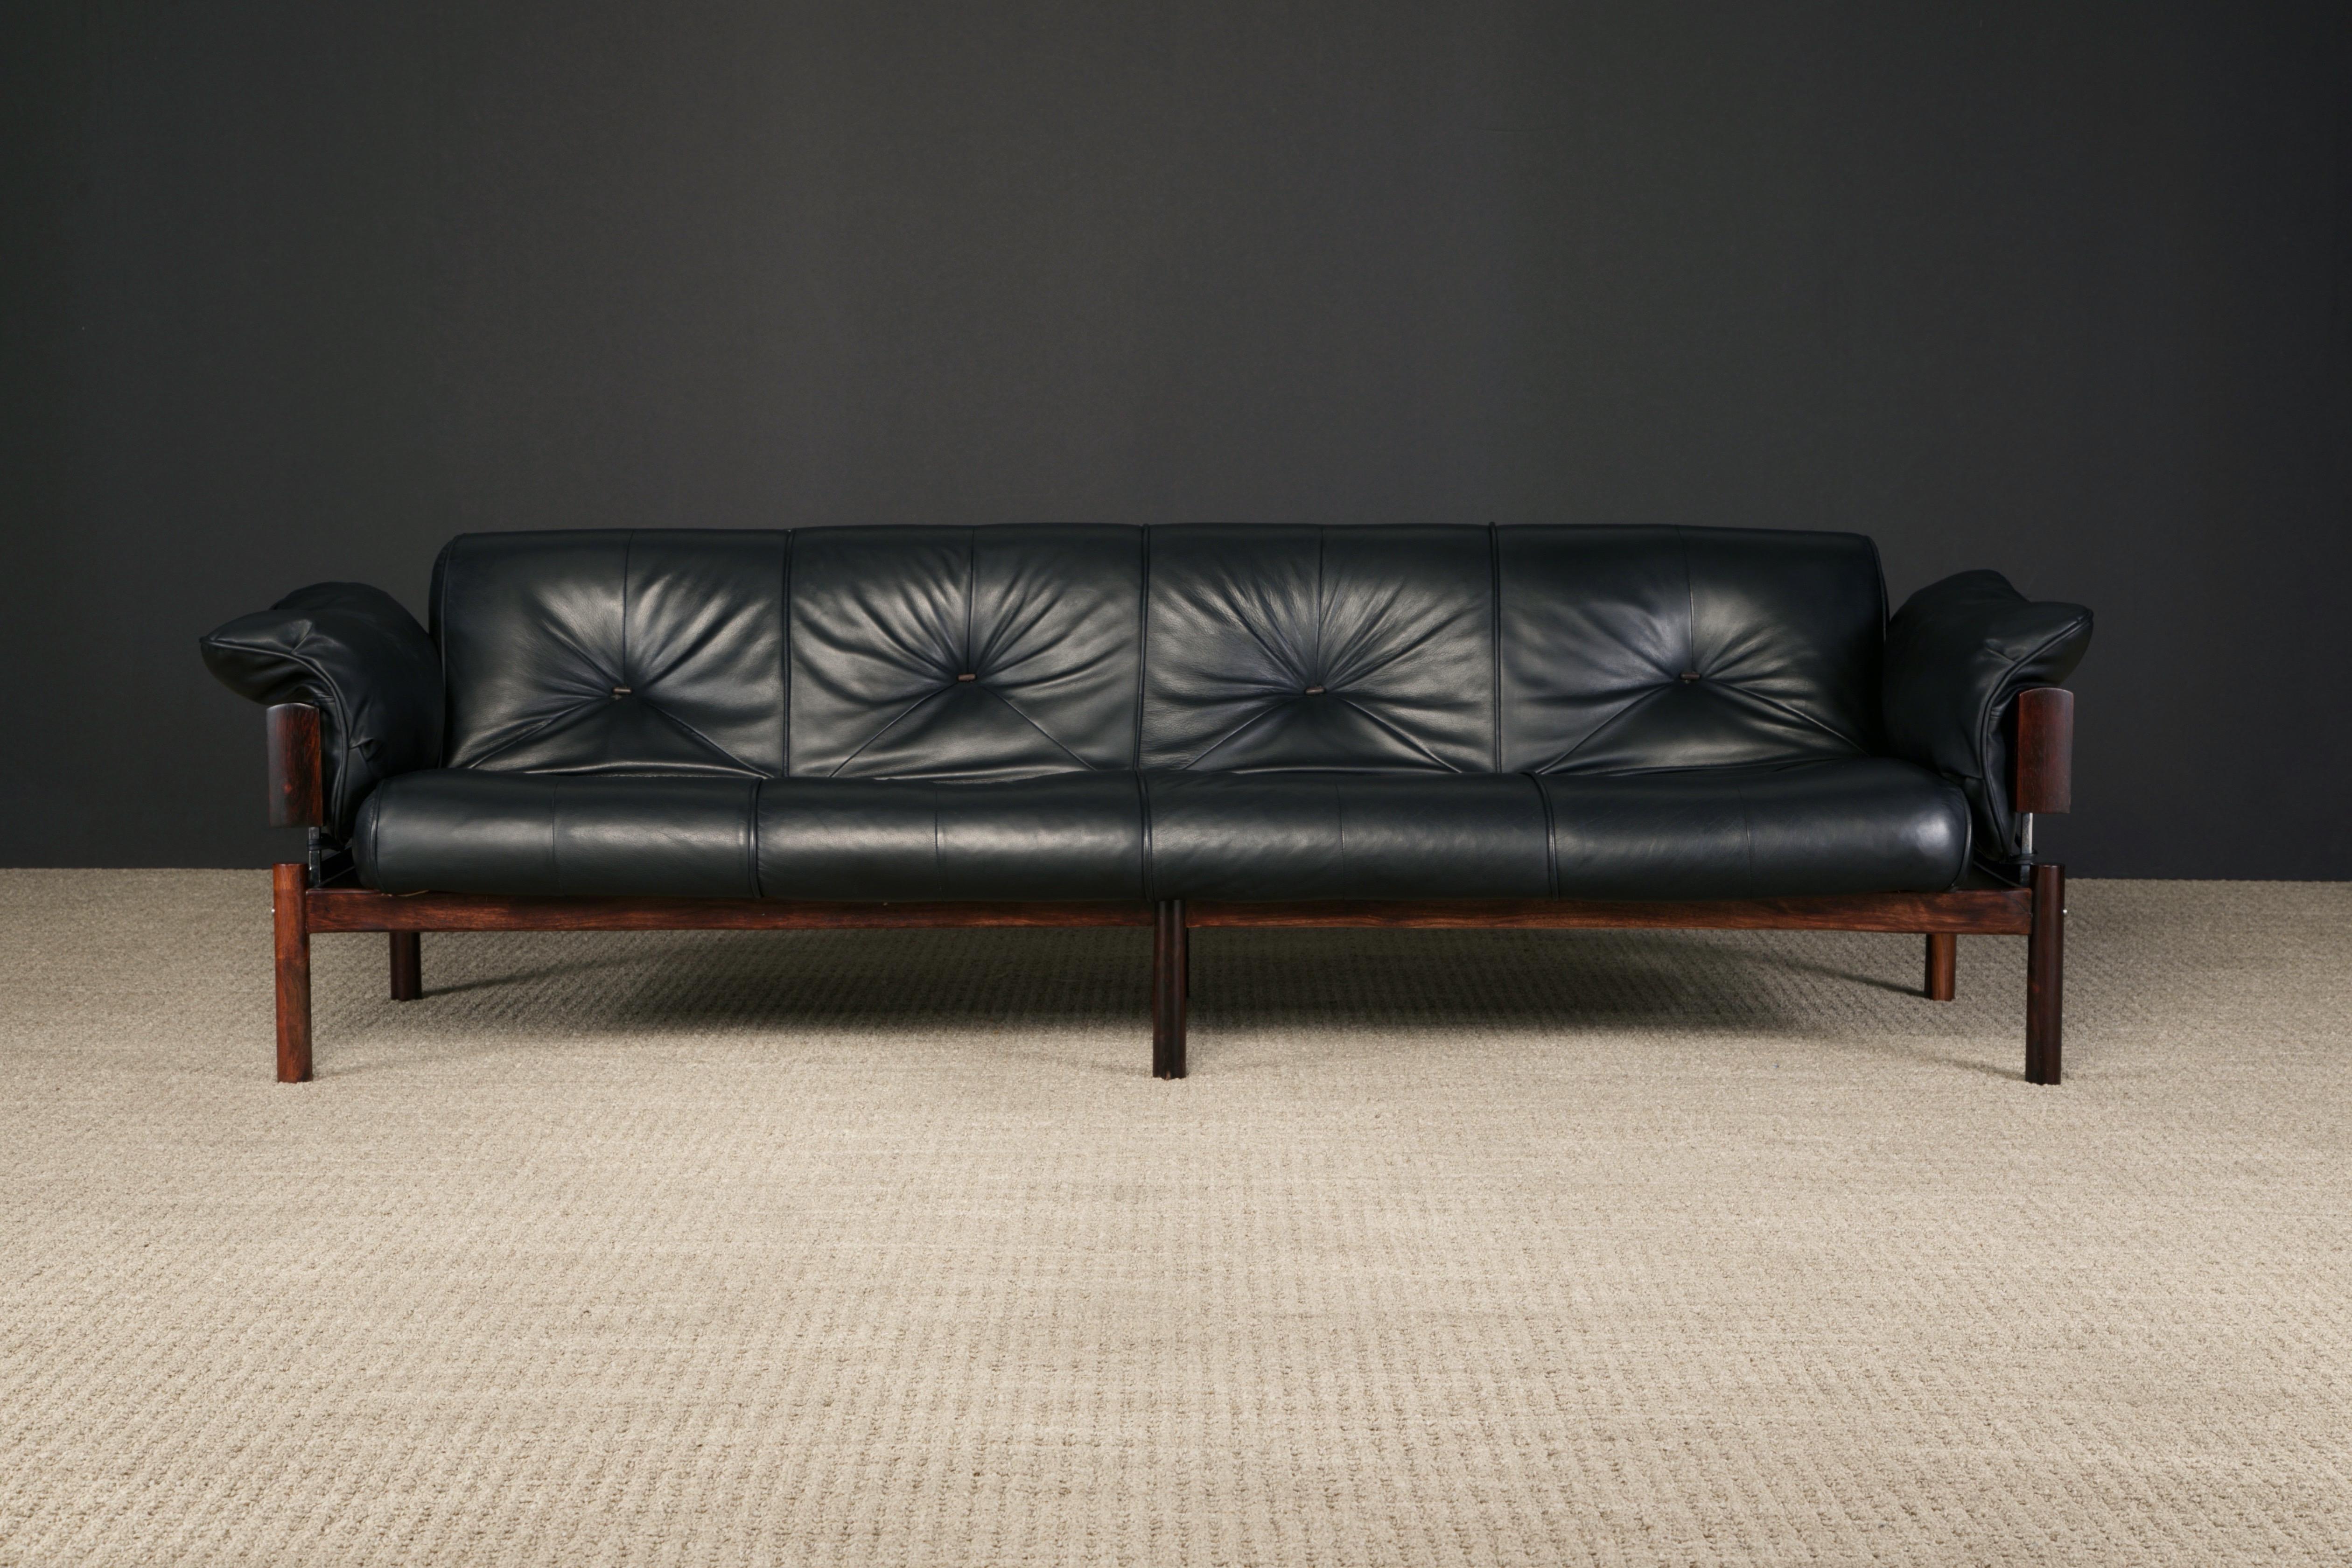 This gorgeous MP-13 four-seat sofa by Brazilian designer Percival Lafer for Lafer MP was designed in 1967, this example an early production made for Brazil and recently imported to the US. Featuring a gorgeous Brazilian Rosewood frame with vivid